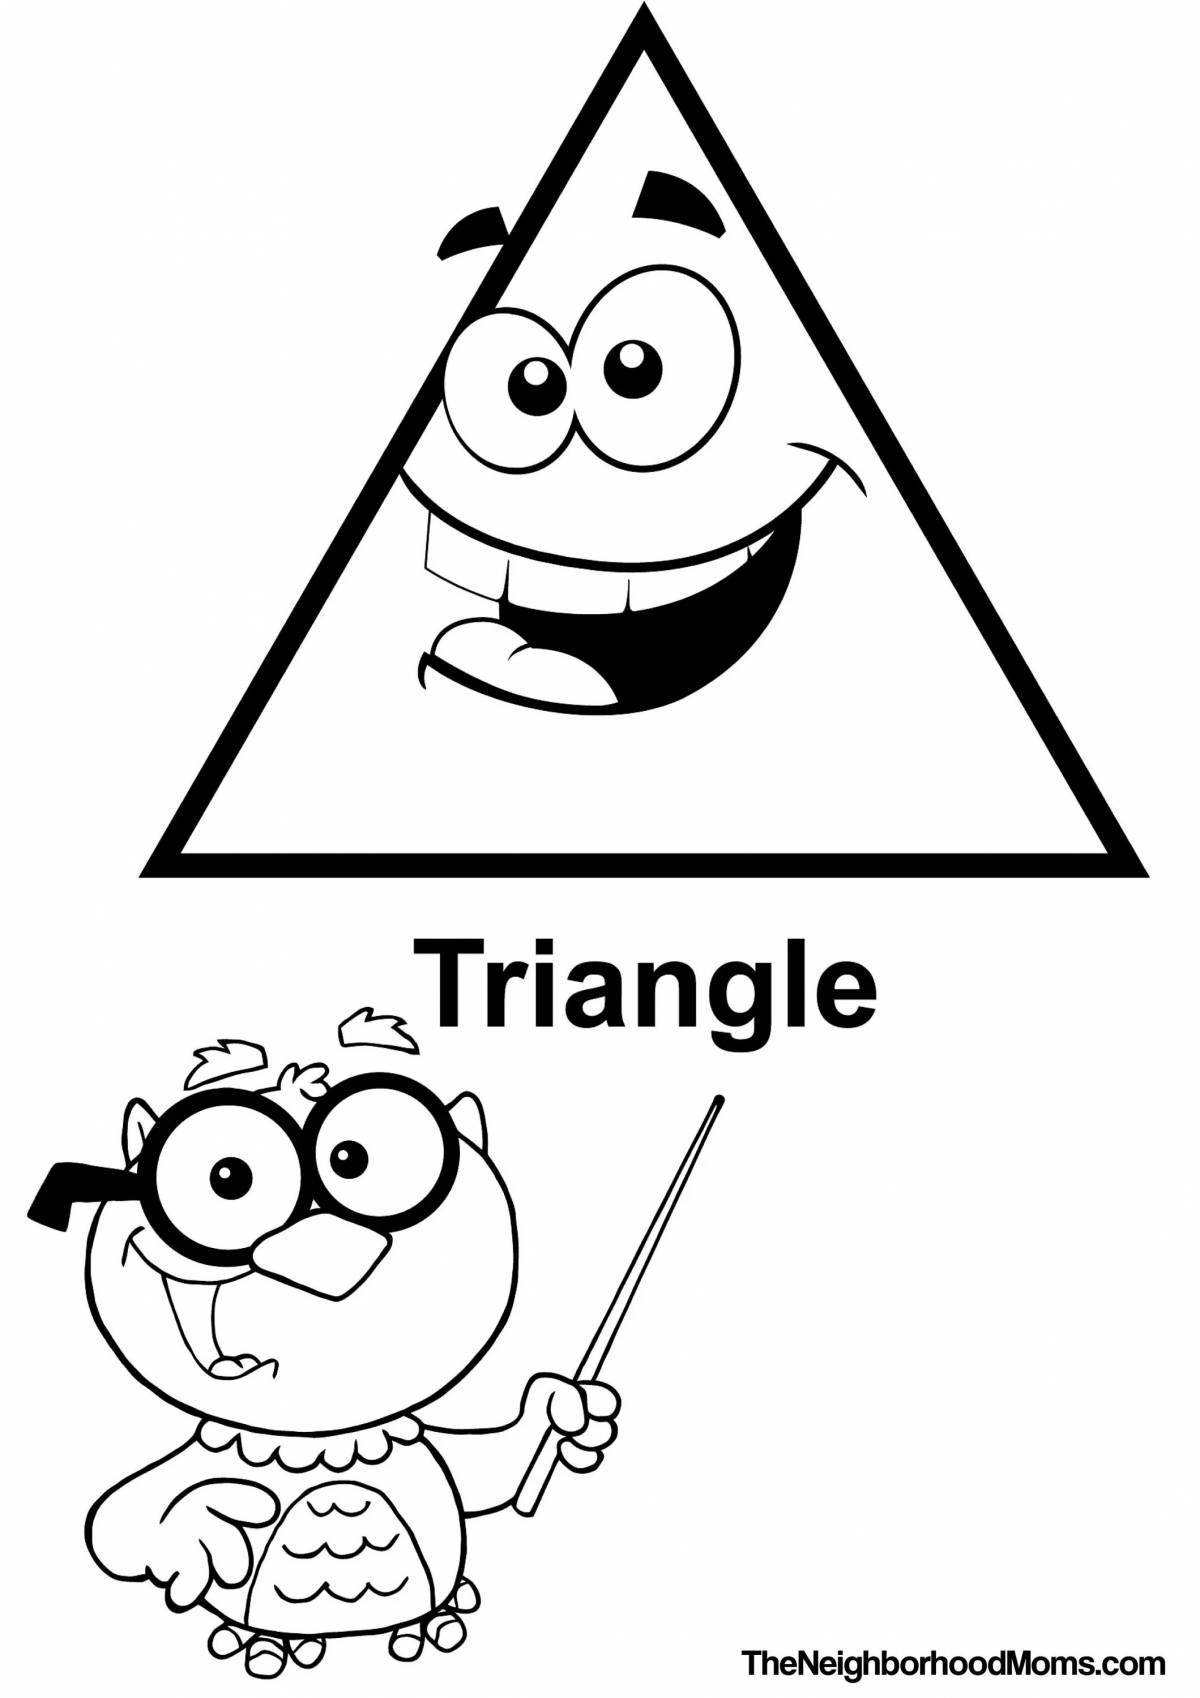 Crazy Triangle coloring pages for kids